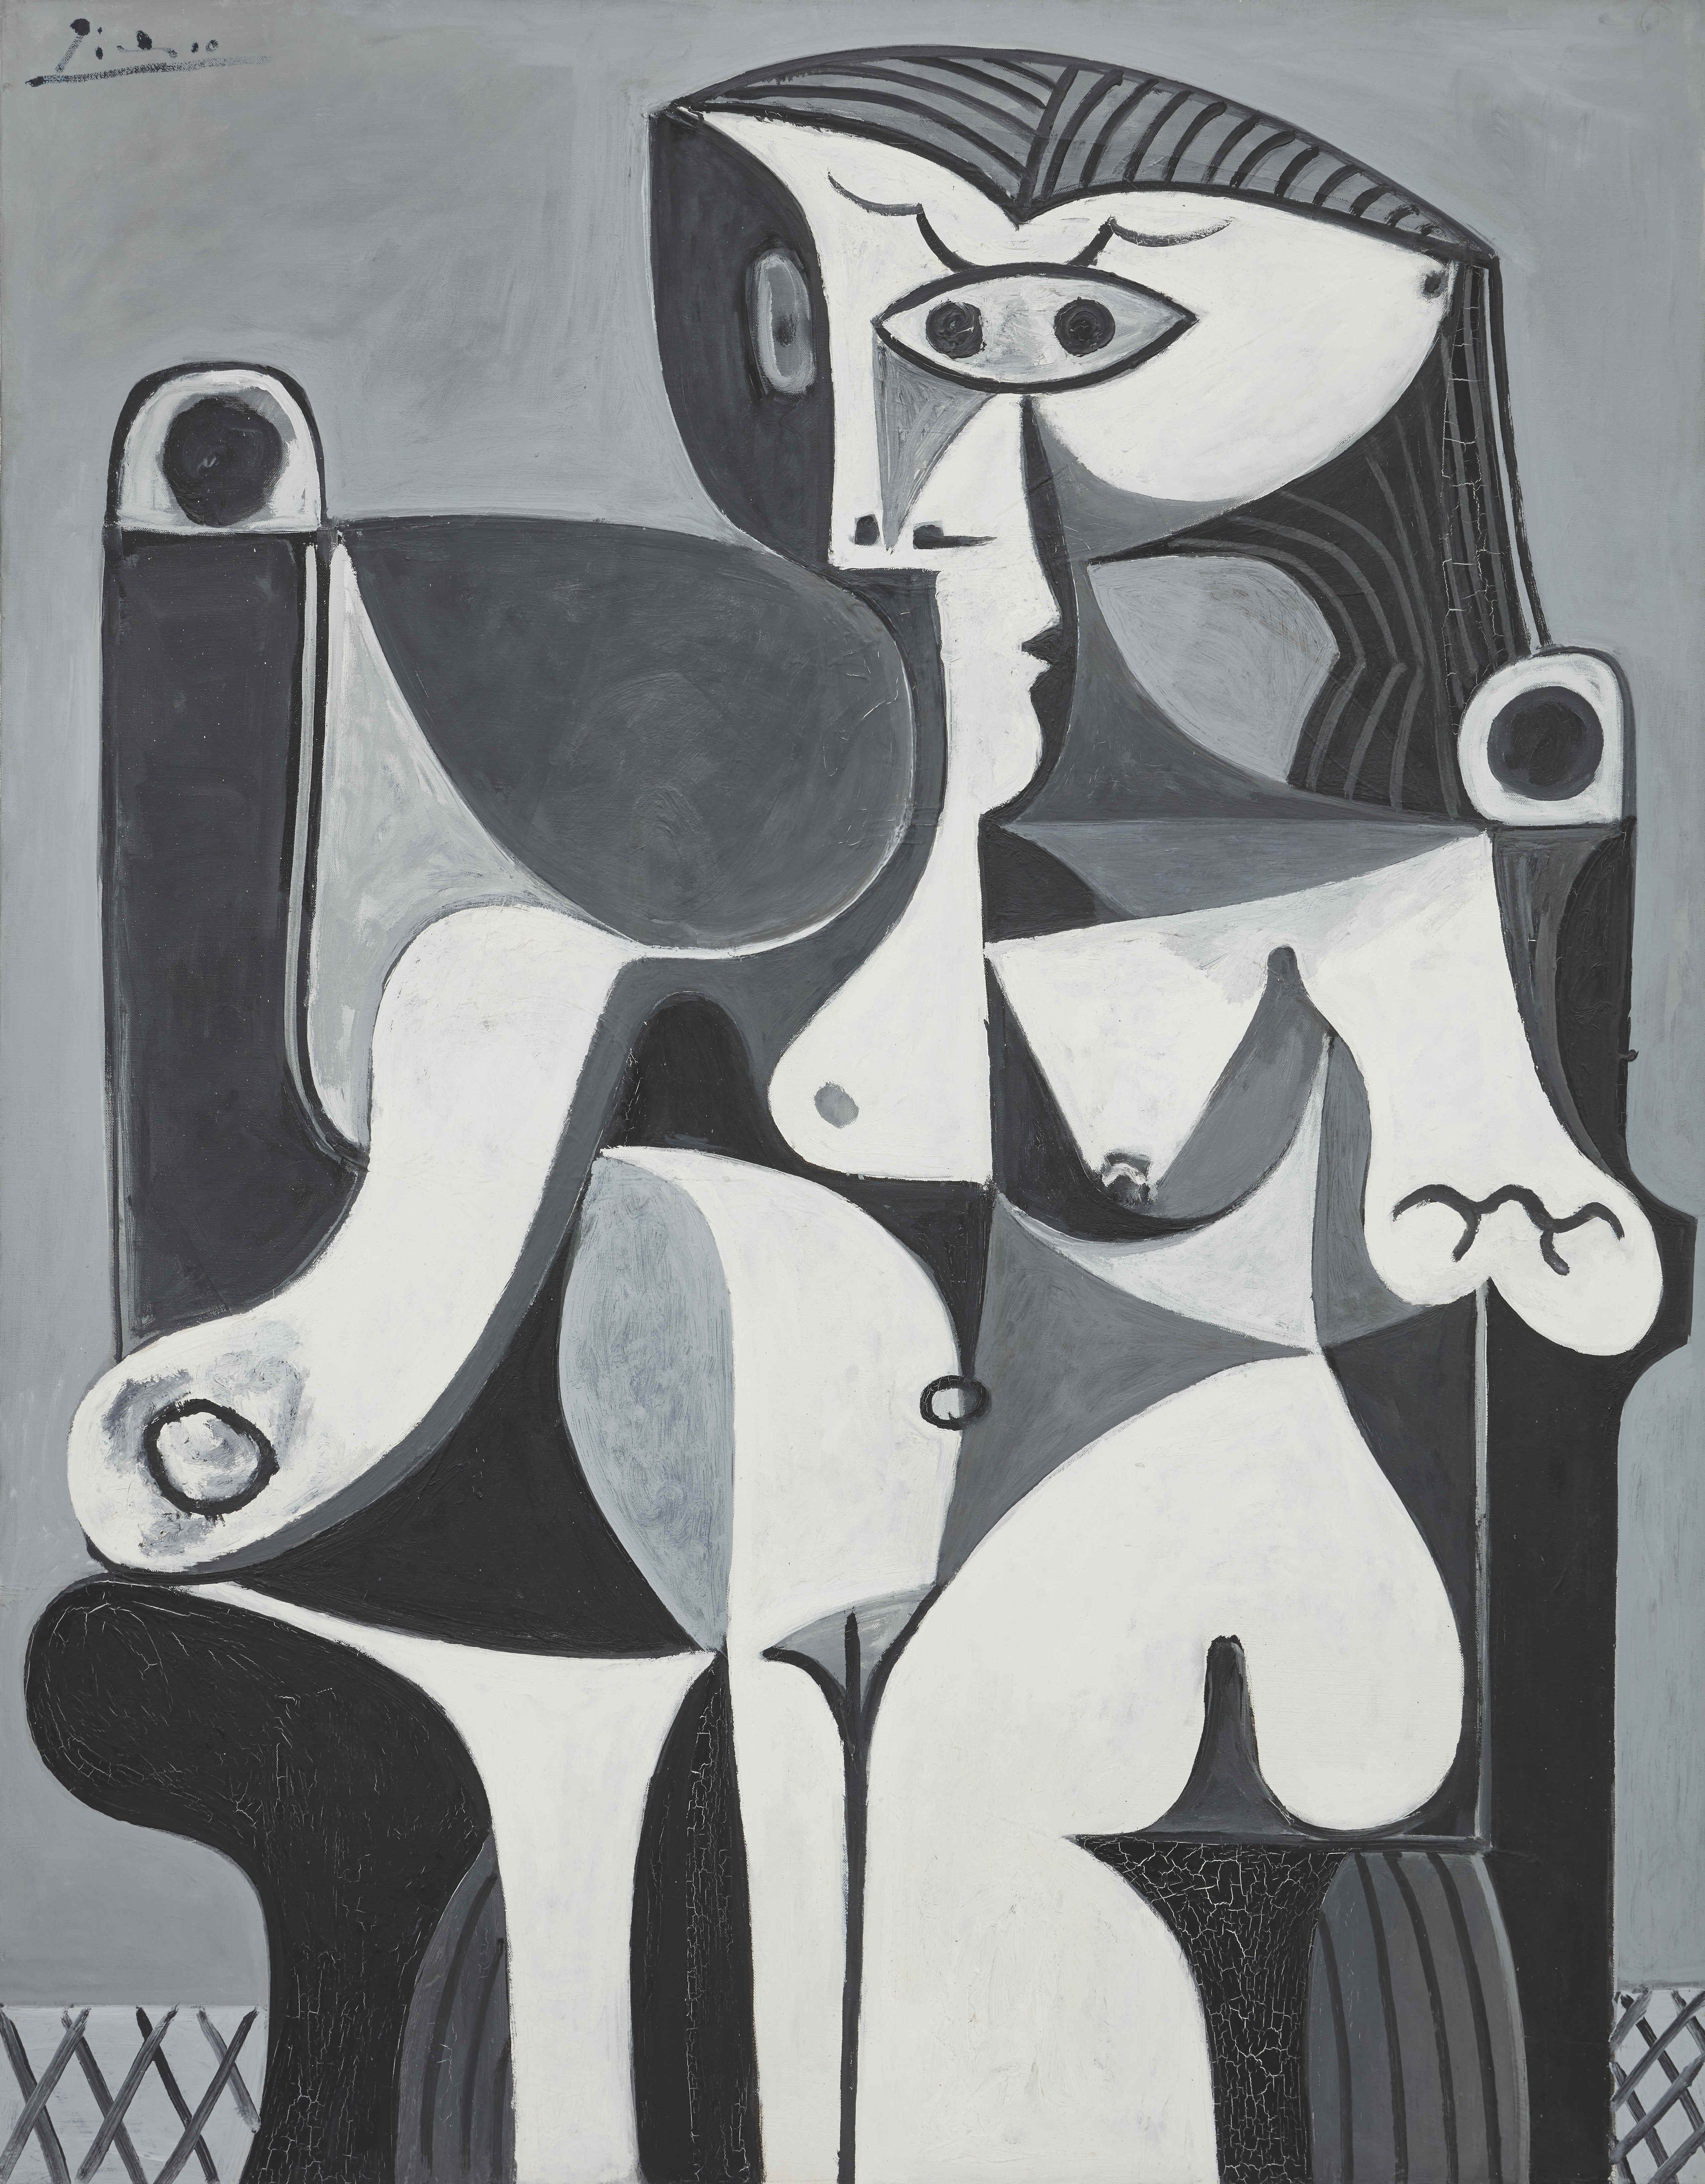 Pablo Picasso. Femme assise (Jacqueline), May 13–June 16, 1962. Oil on canvas © 2021 Estate of Pablo Picasso/Artists Rights Society (ARS), New York. Photo: Kent Pell